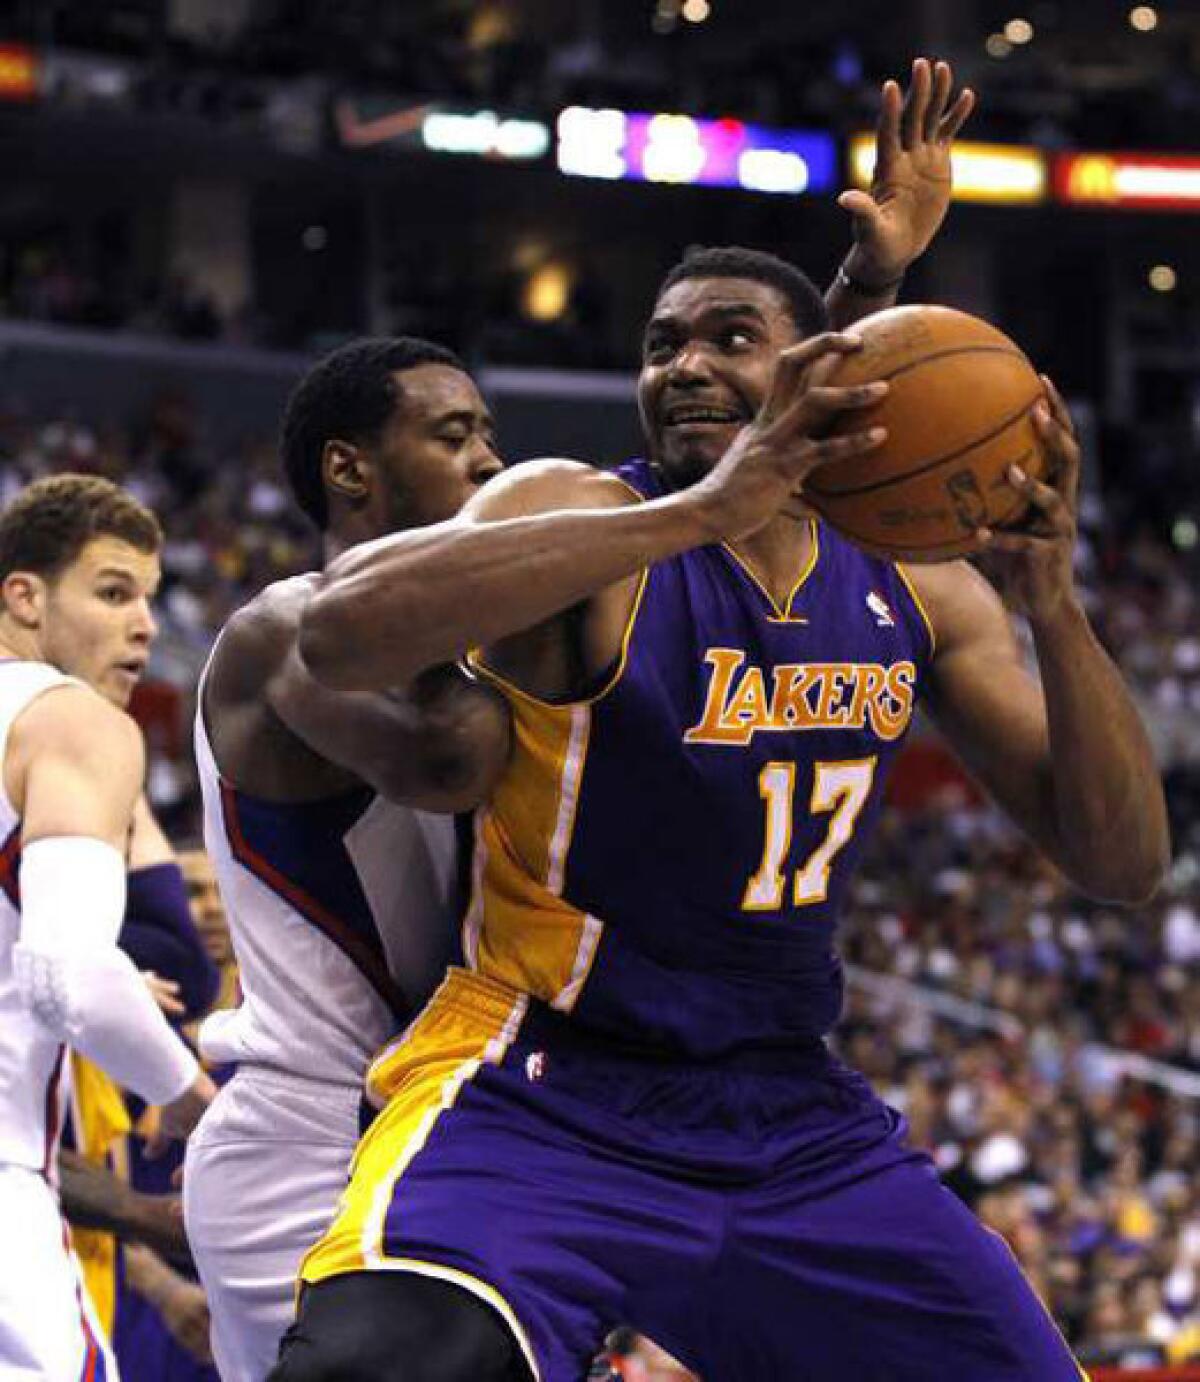 5 memorable moments from Andrew Bynum's up-and-down NBA career